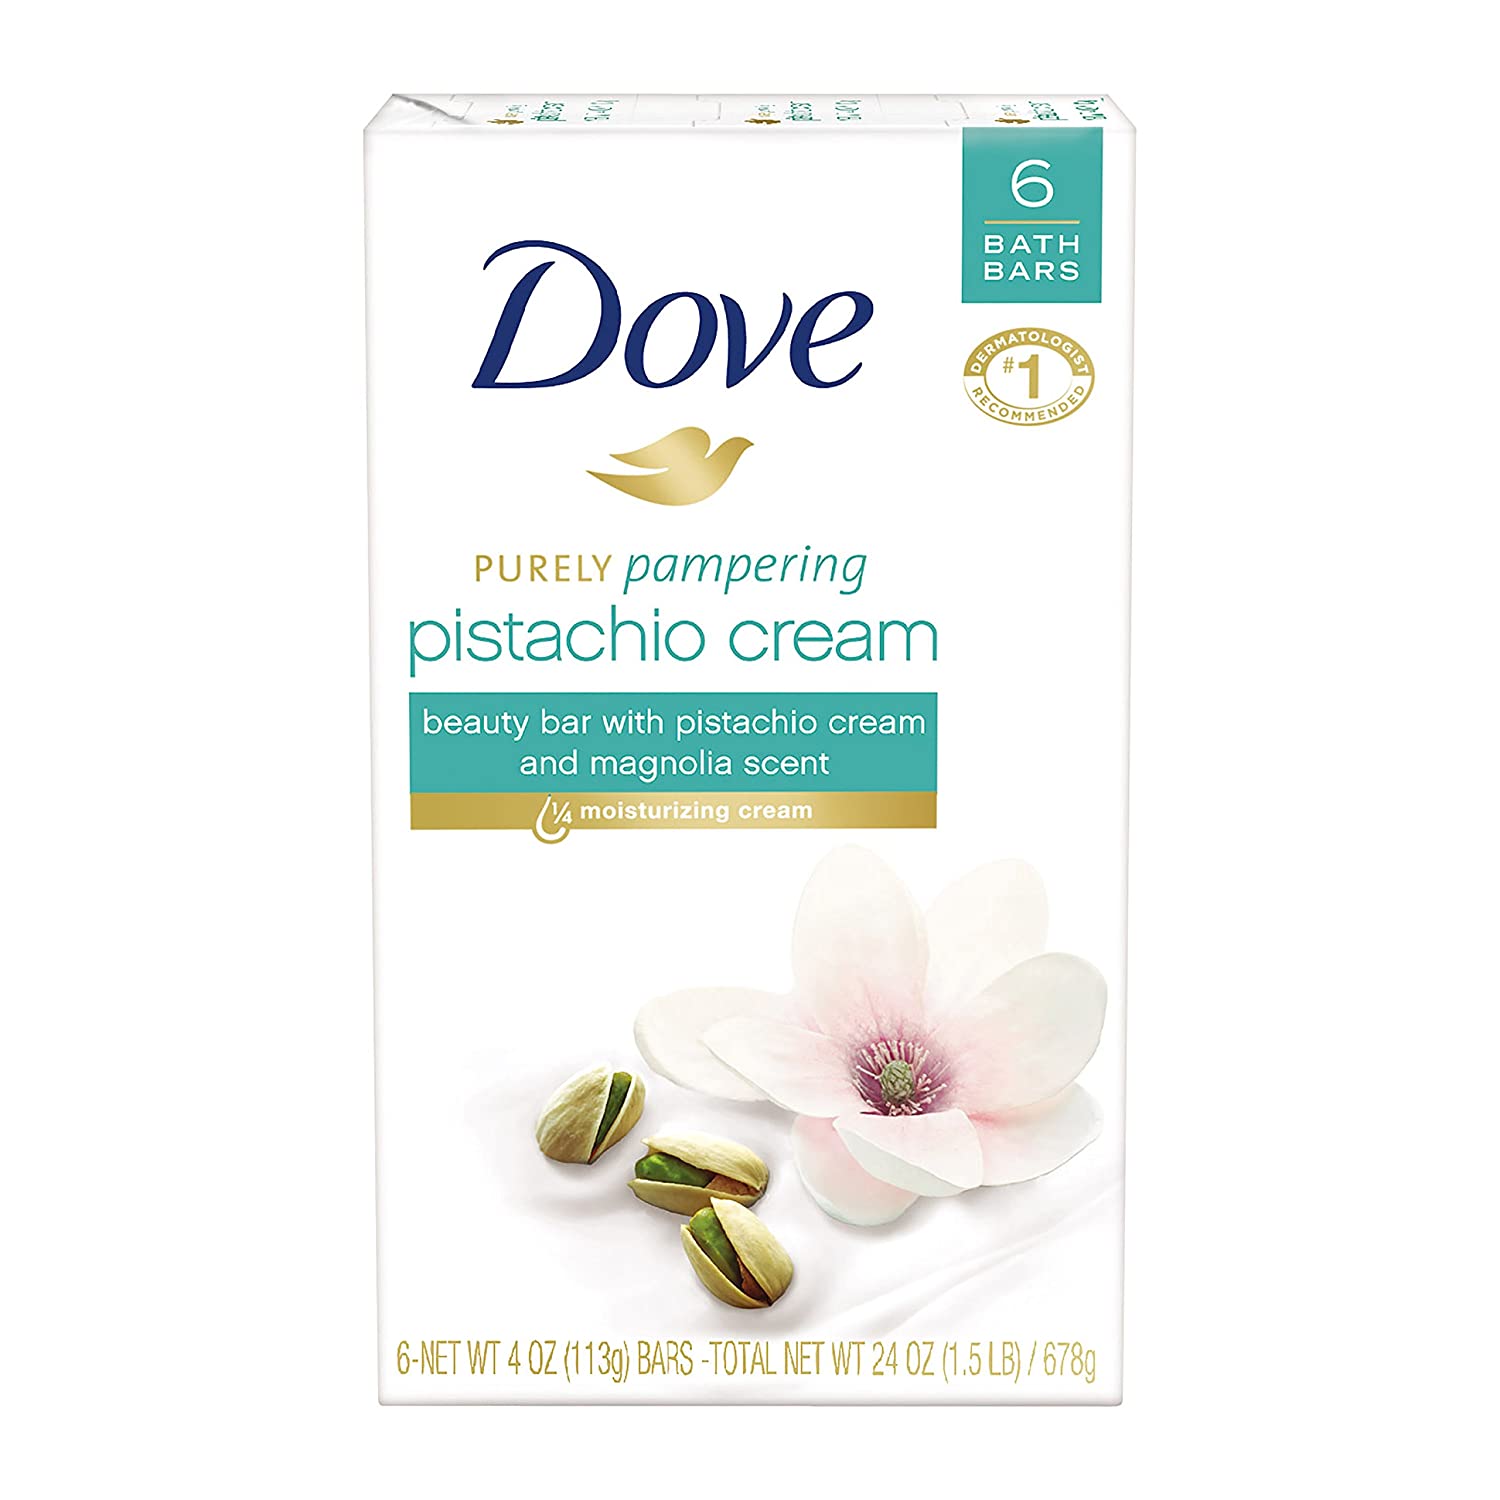 Dove Purely Pampering Beauty Bar, Pistachio Cream with Magnolia 4 oz, 6 Bar 24Oz (680g)